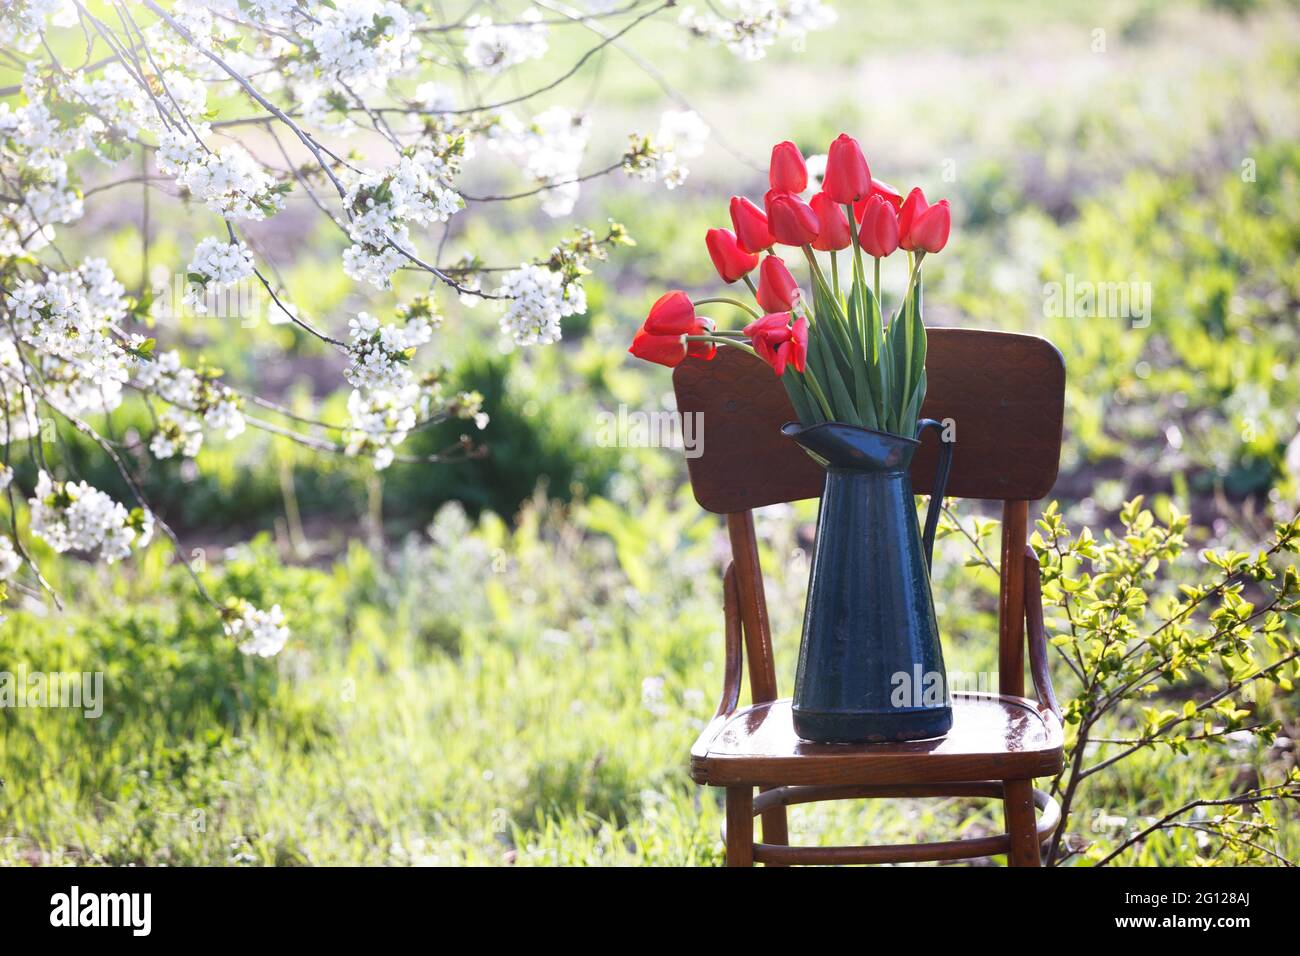 spring garden and steel life. red tulips in a retro jug stand on a Viennese chair in the garden Stock Photo